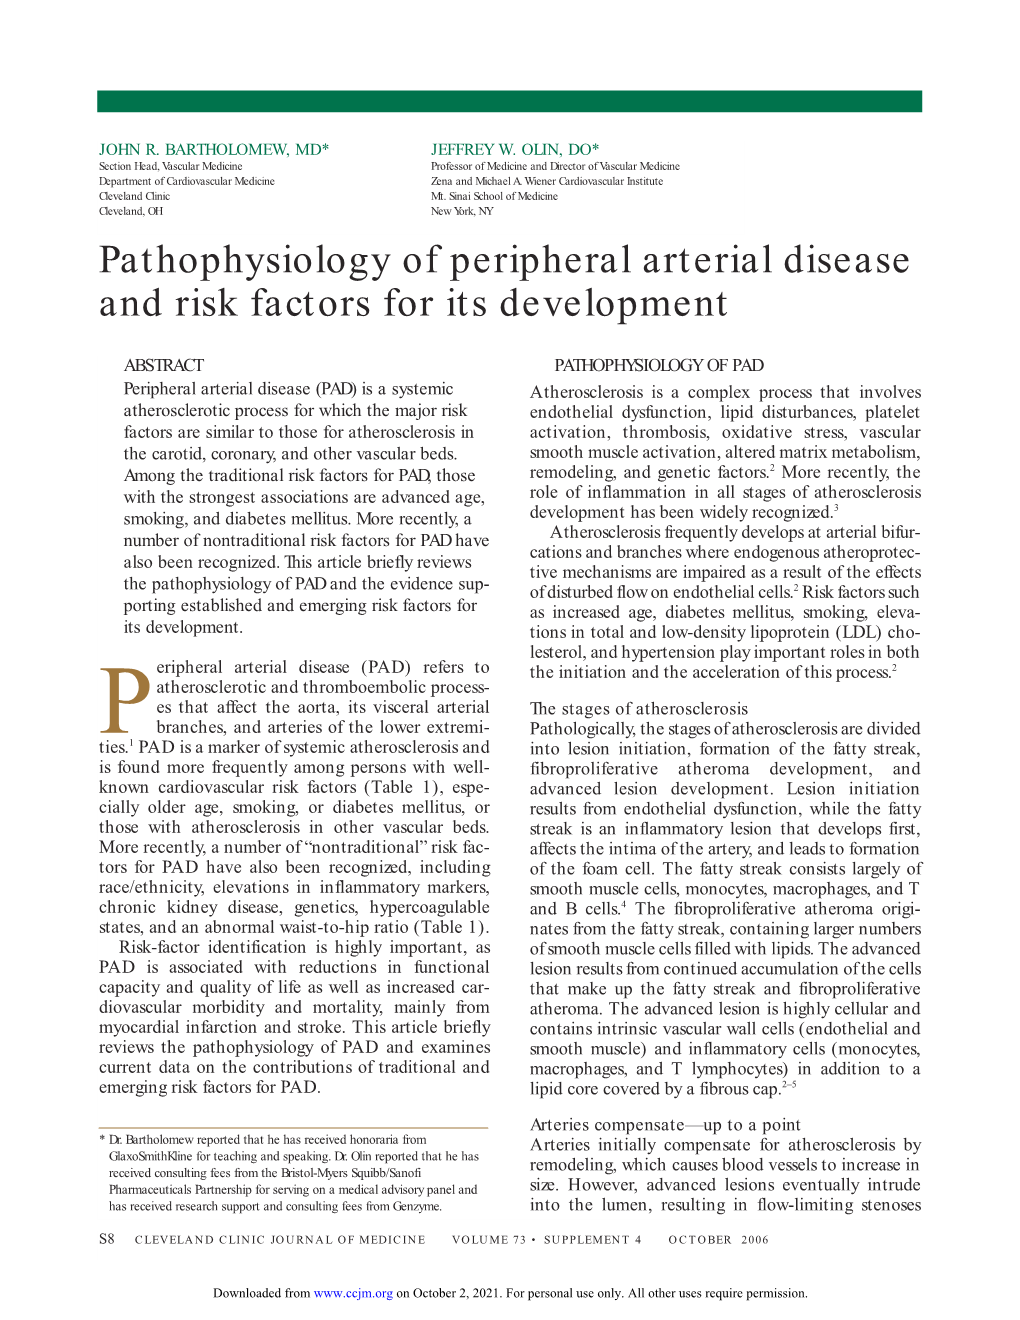 Pathophysiology of Peripheral Arterial Disease and Risk Factors for Its Development